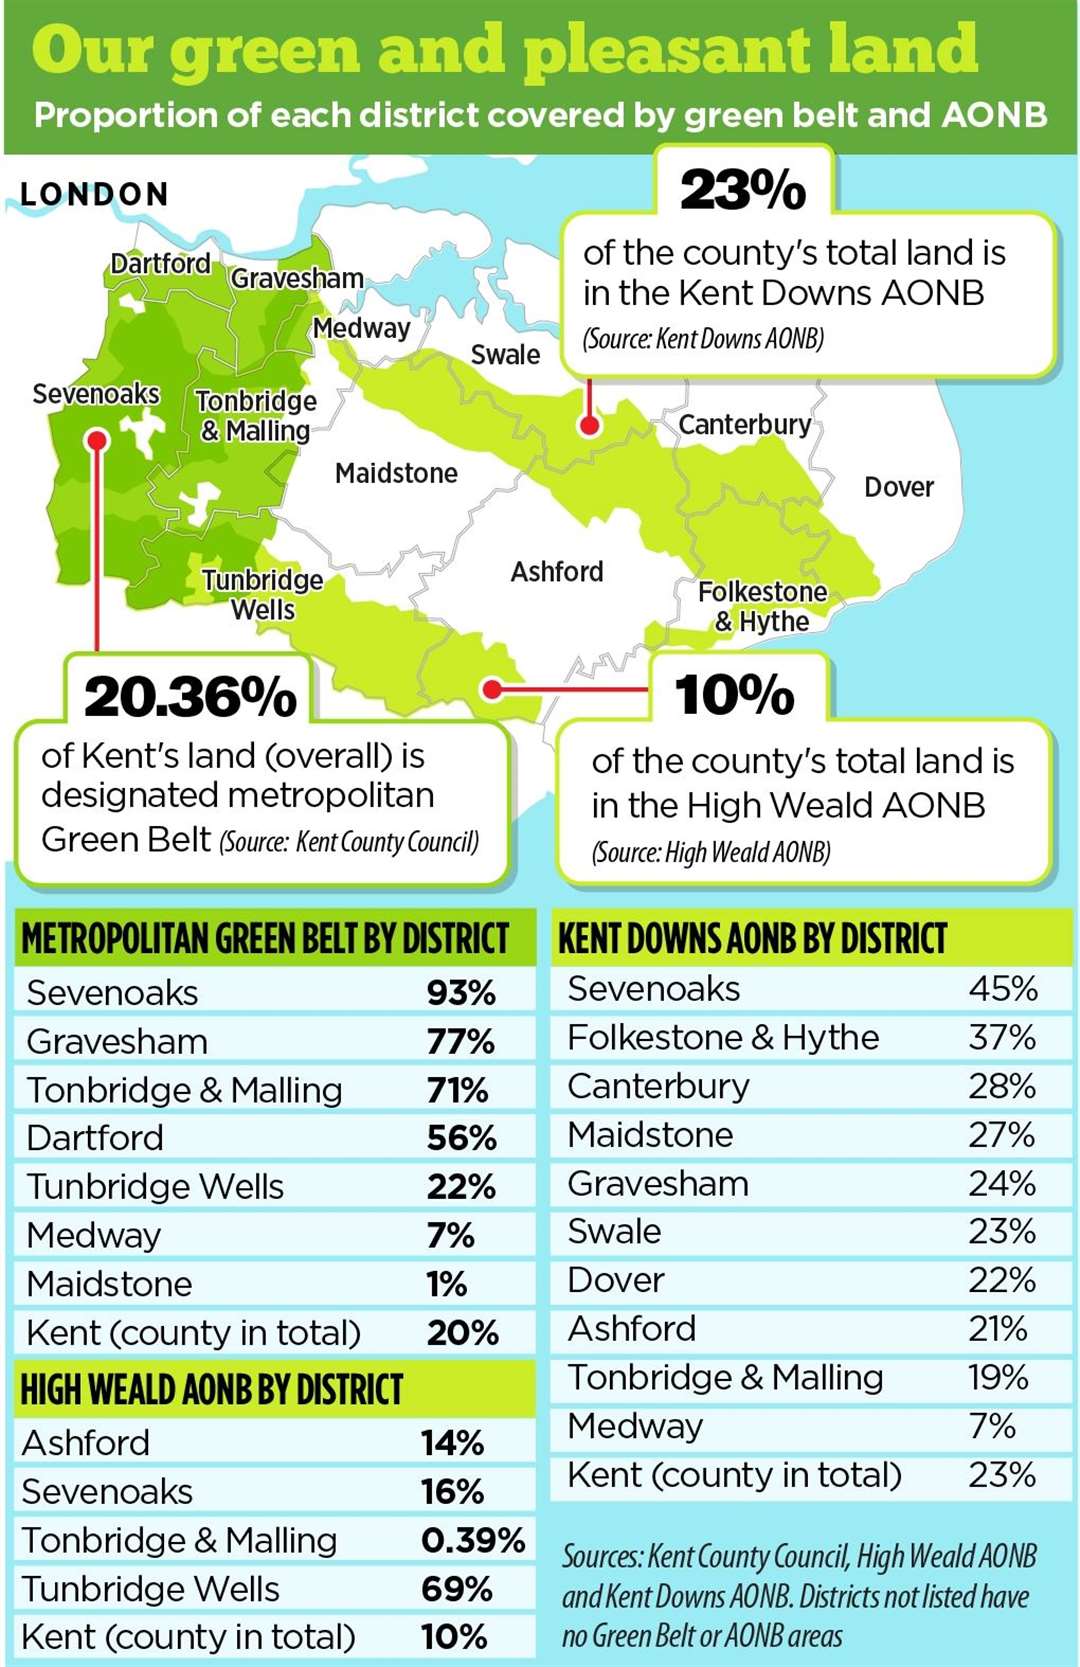 The proportion of green belt or AONBs across the county